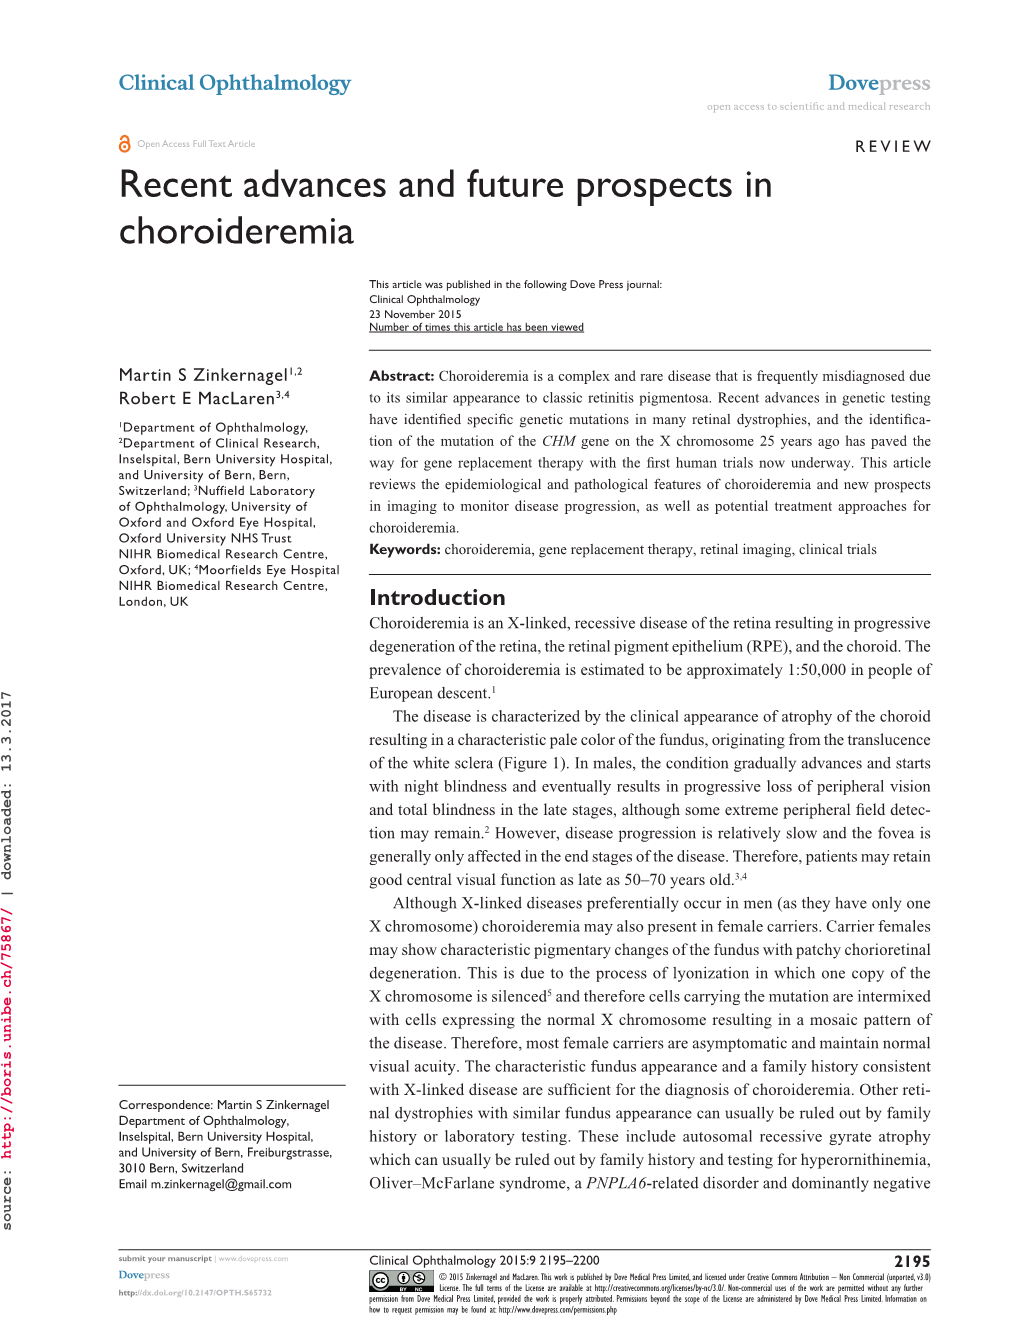 Recent Advances and Future Prospects in Choroideremia